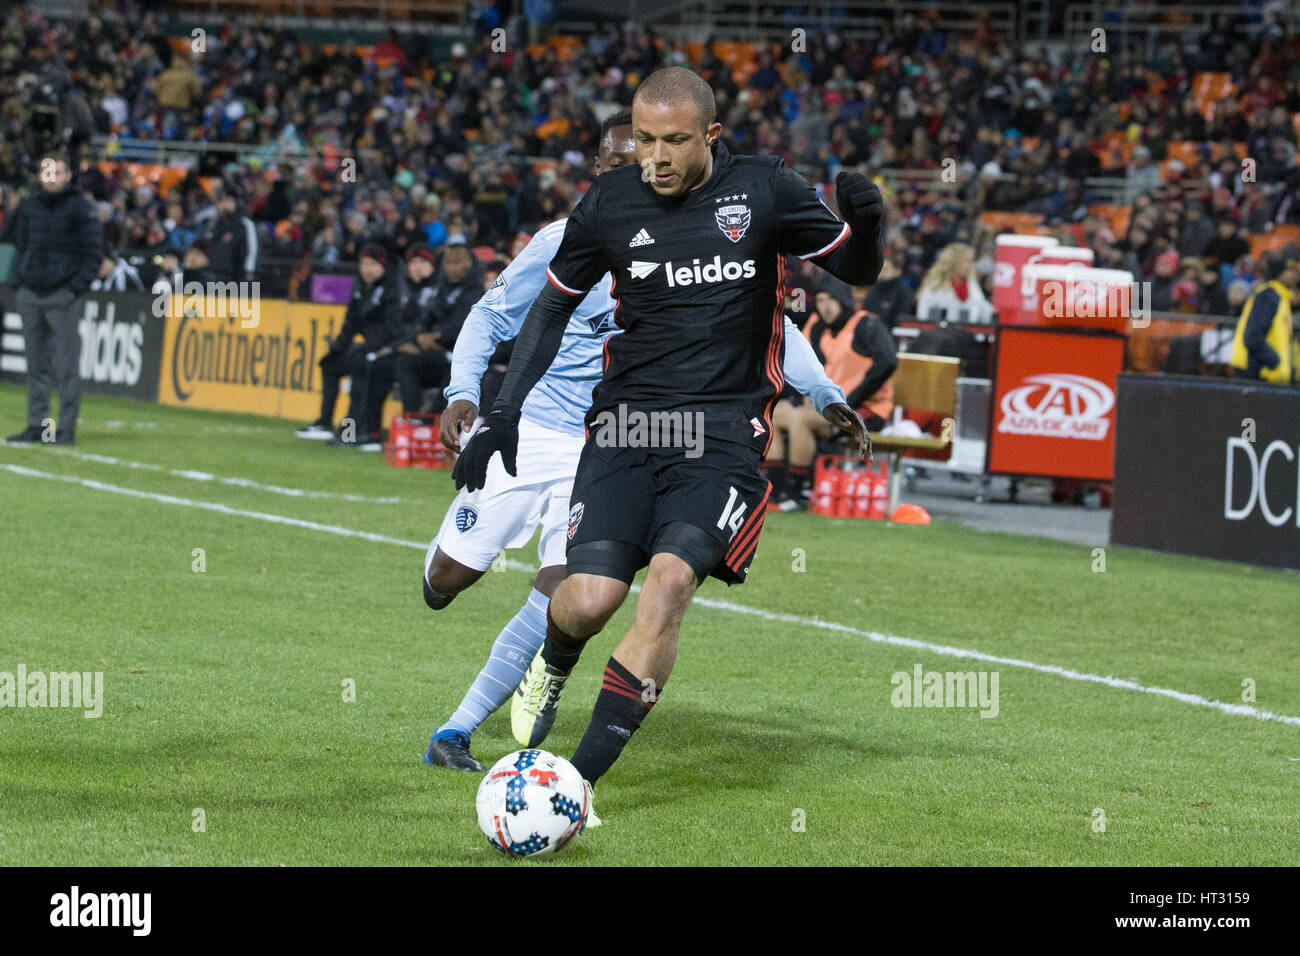 D.C. United midfielder Nick DeLeon (14) during D.C. United's home opener against Sporting Kansas City which finished 0-0 at RFK Stadium in Washington, D.C. on Saturday March 4, 2017. Stock Photo